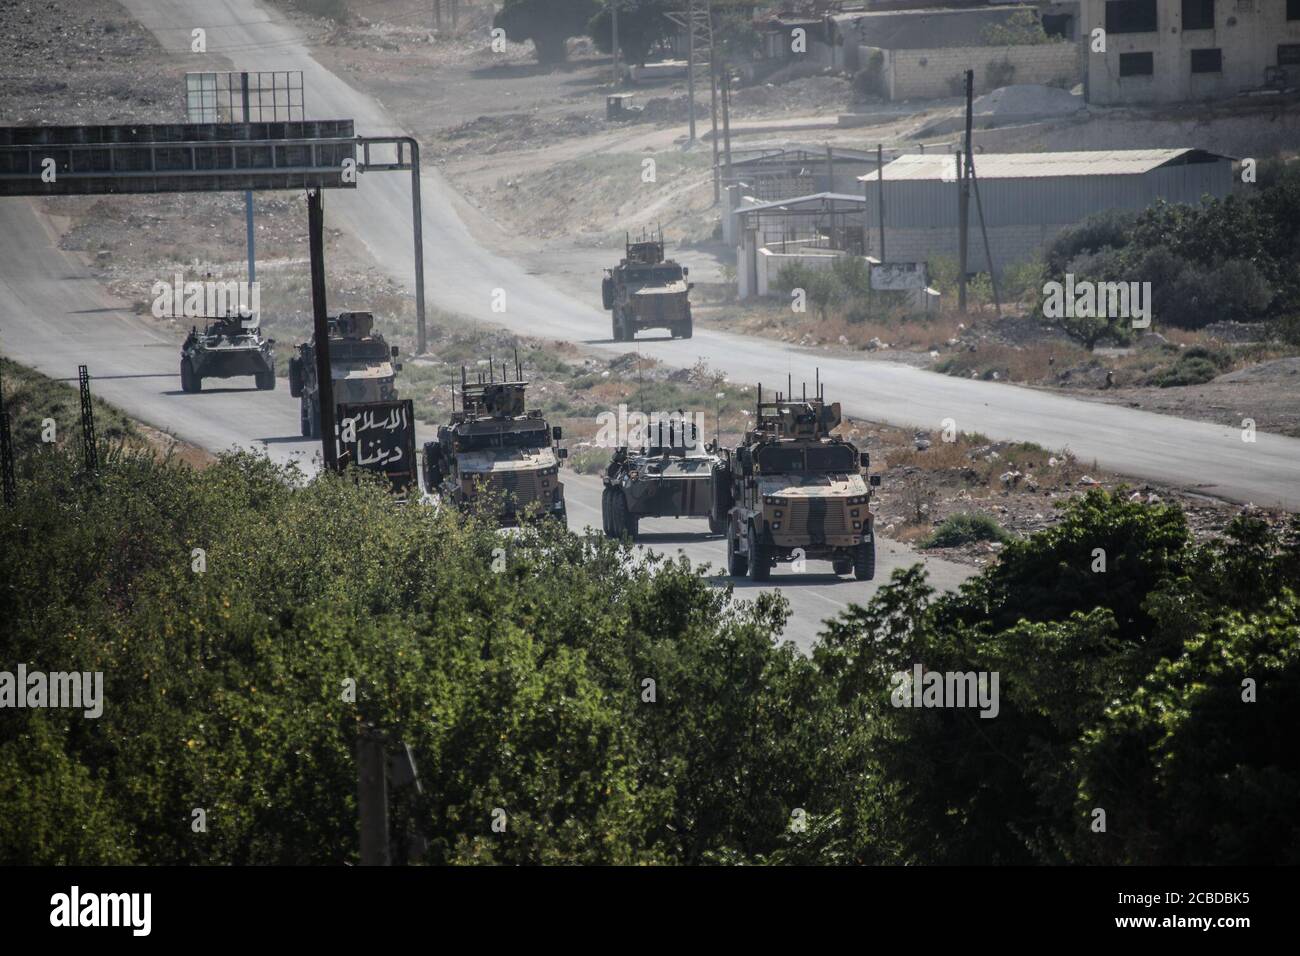 Idlib, Syria. 12th Aug, 2020. The Russian Military and the Turkish military conducted their 24th joint patrol on the M4 highway in the northwestern Syria region of Greater Idlib, on August 12, 2020. The joint patrol set off from the town of Tronba in southern Idlib and reached the town of Ain Hawr in northern Lattakia, completing its entire route. No incidents whatsoever were reported during the patrol. (Photo by Azalden Idlib/INA Photo Agency/Sipa USA) Credit: Sipa USA/Alamy Live News Stock Photo